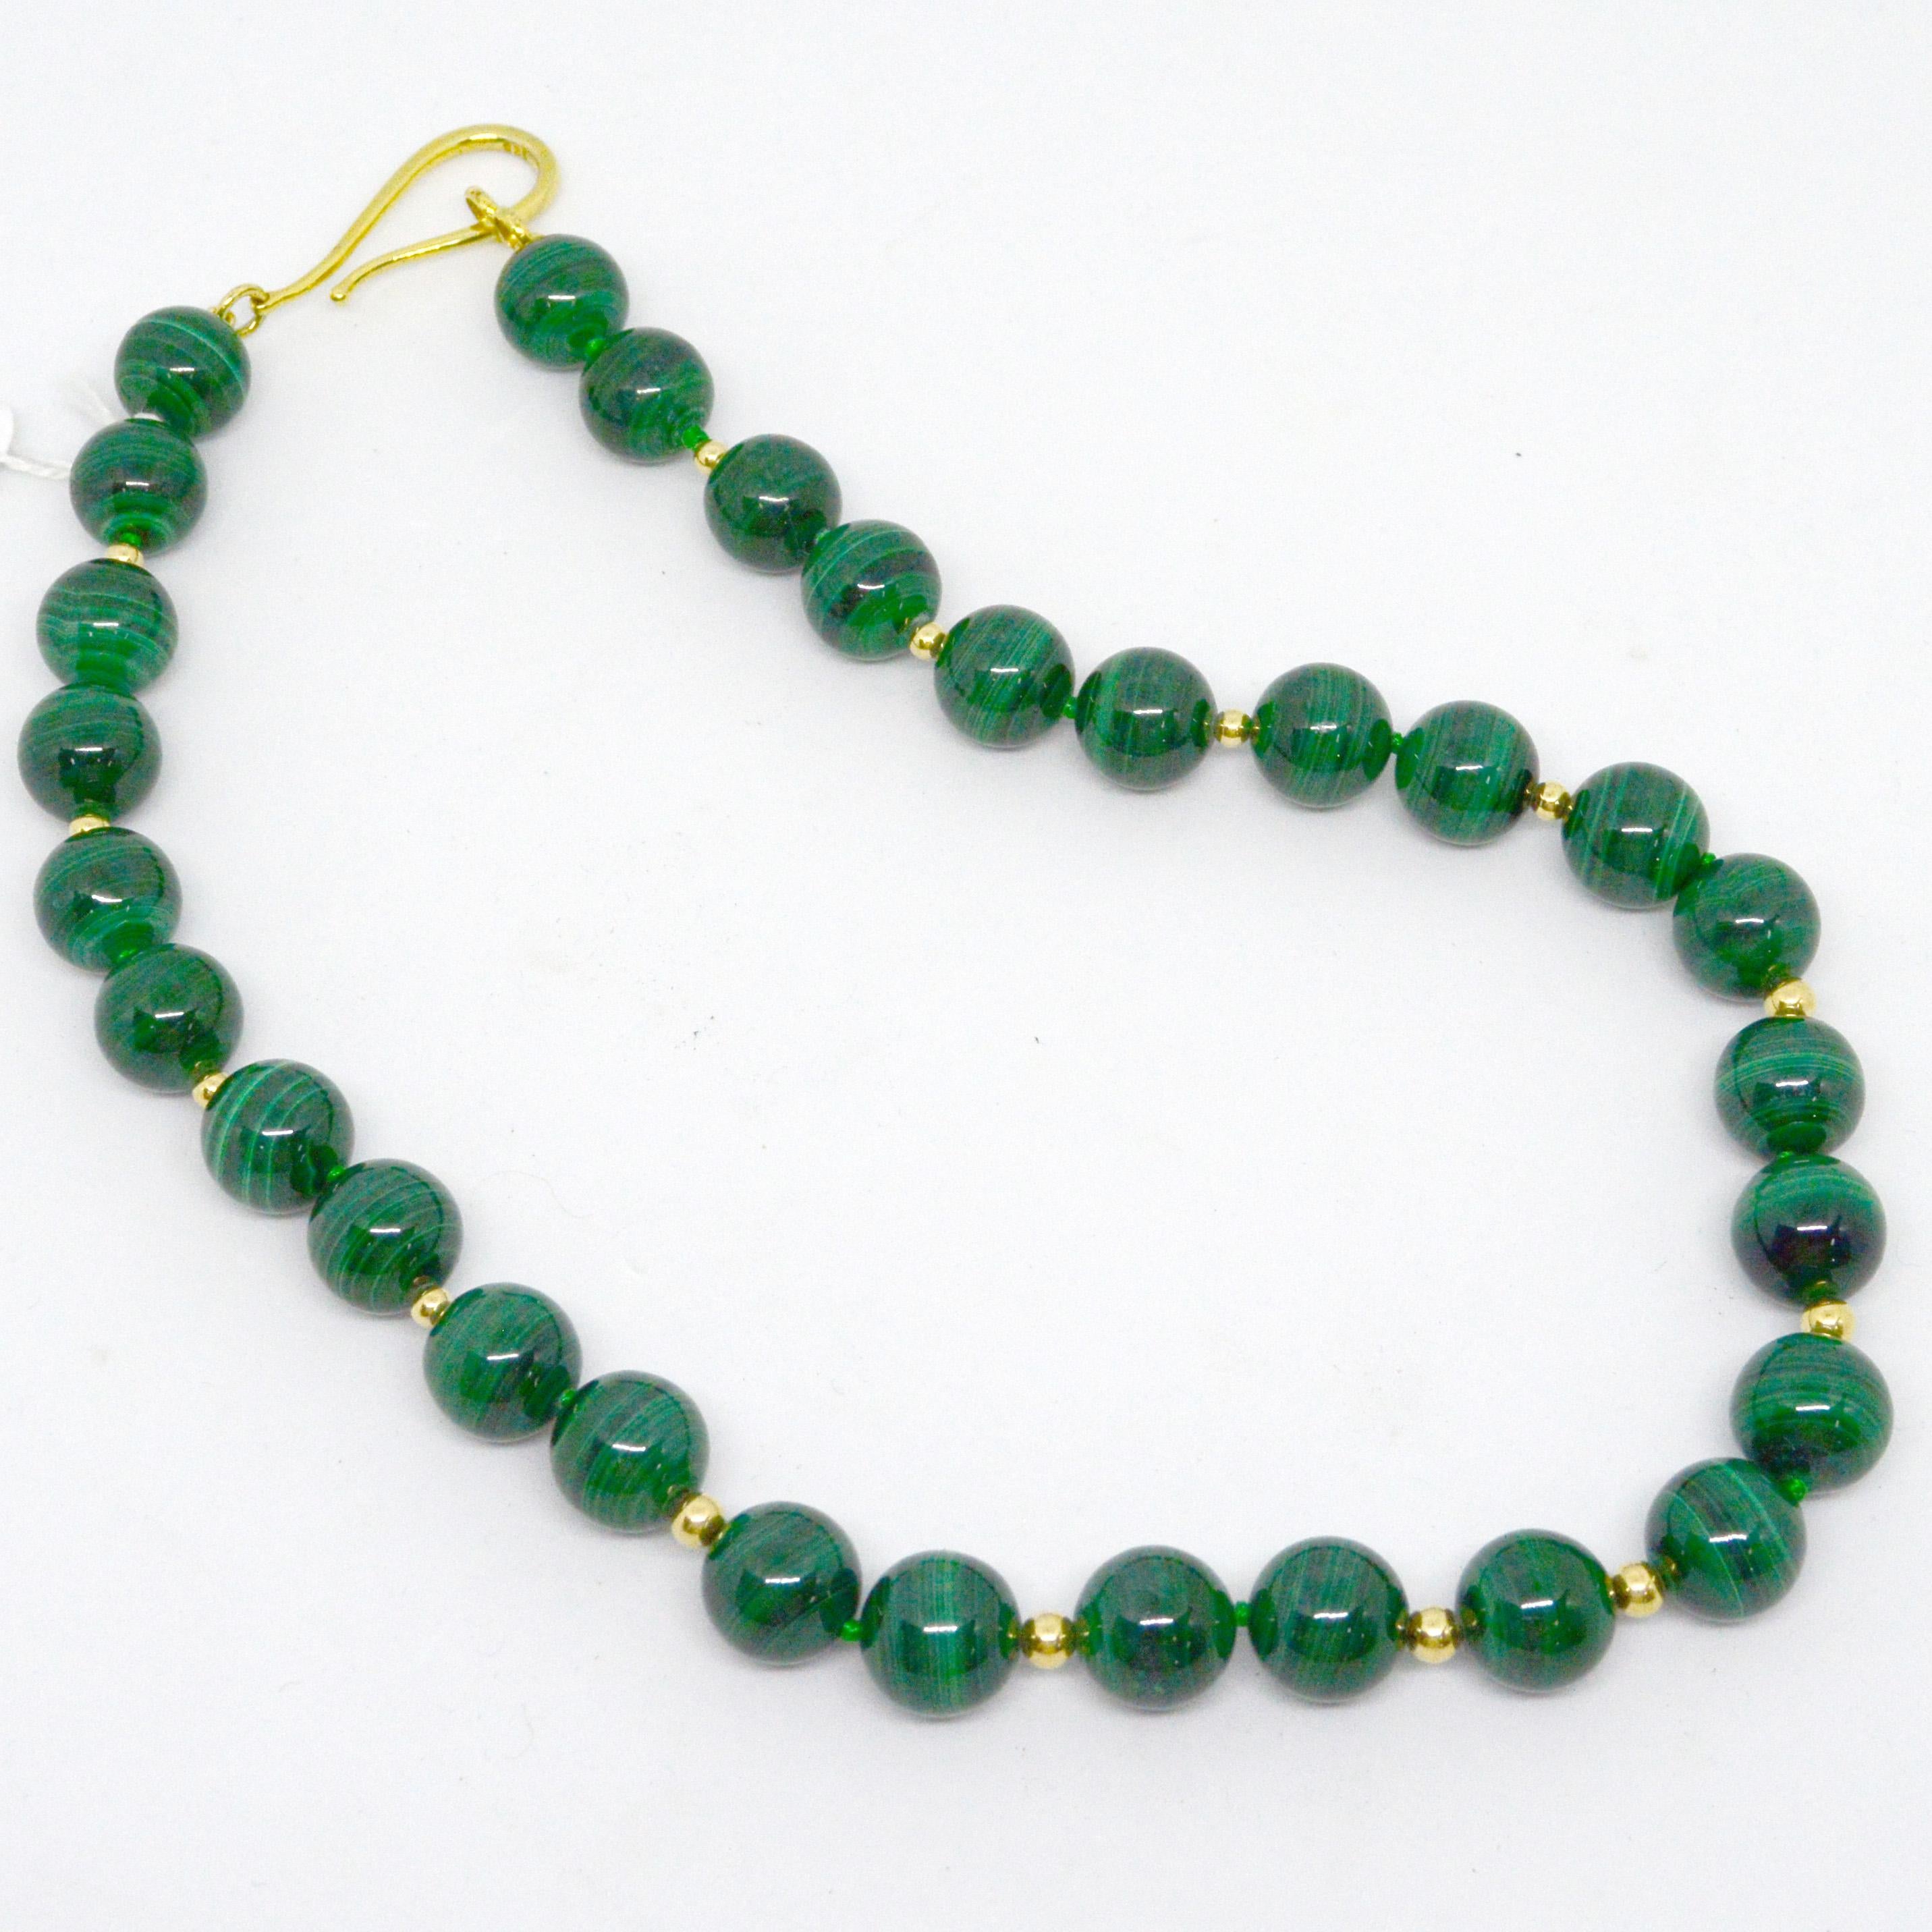 Modern Decadent Jewels Malachite Polished High Grade Spheres Gold Necklace For Sale